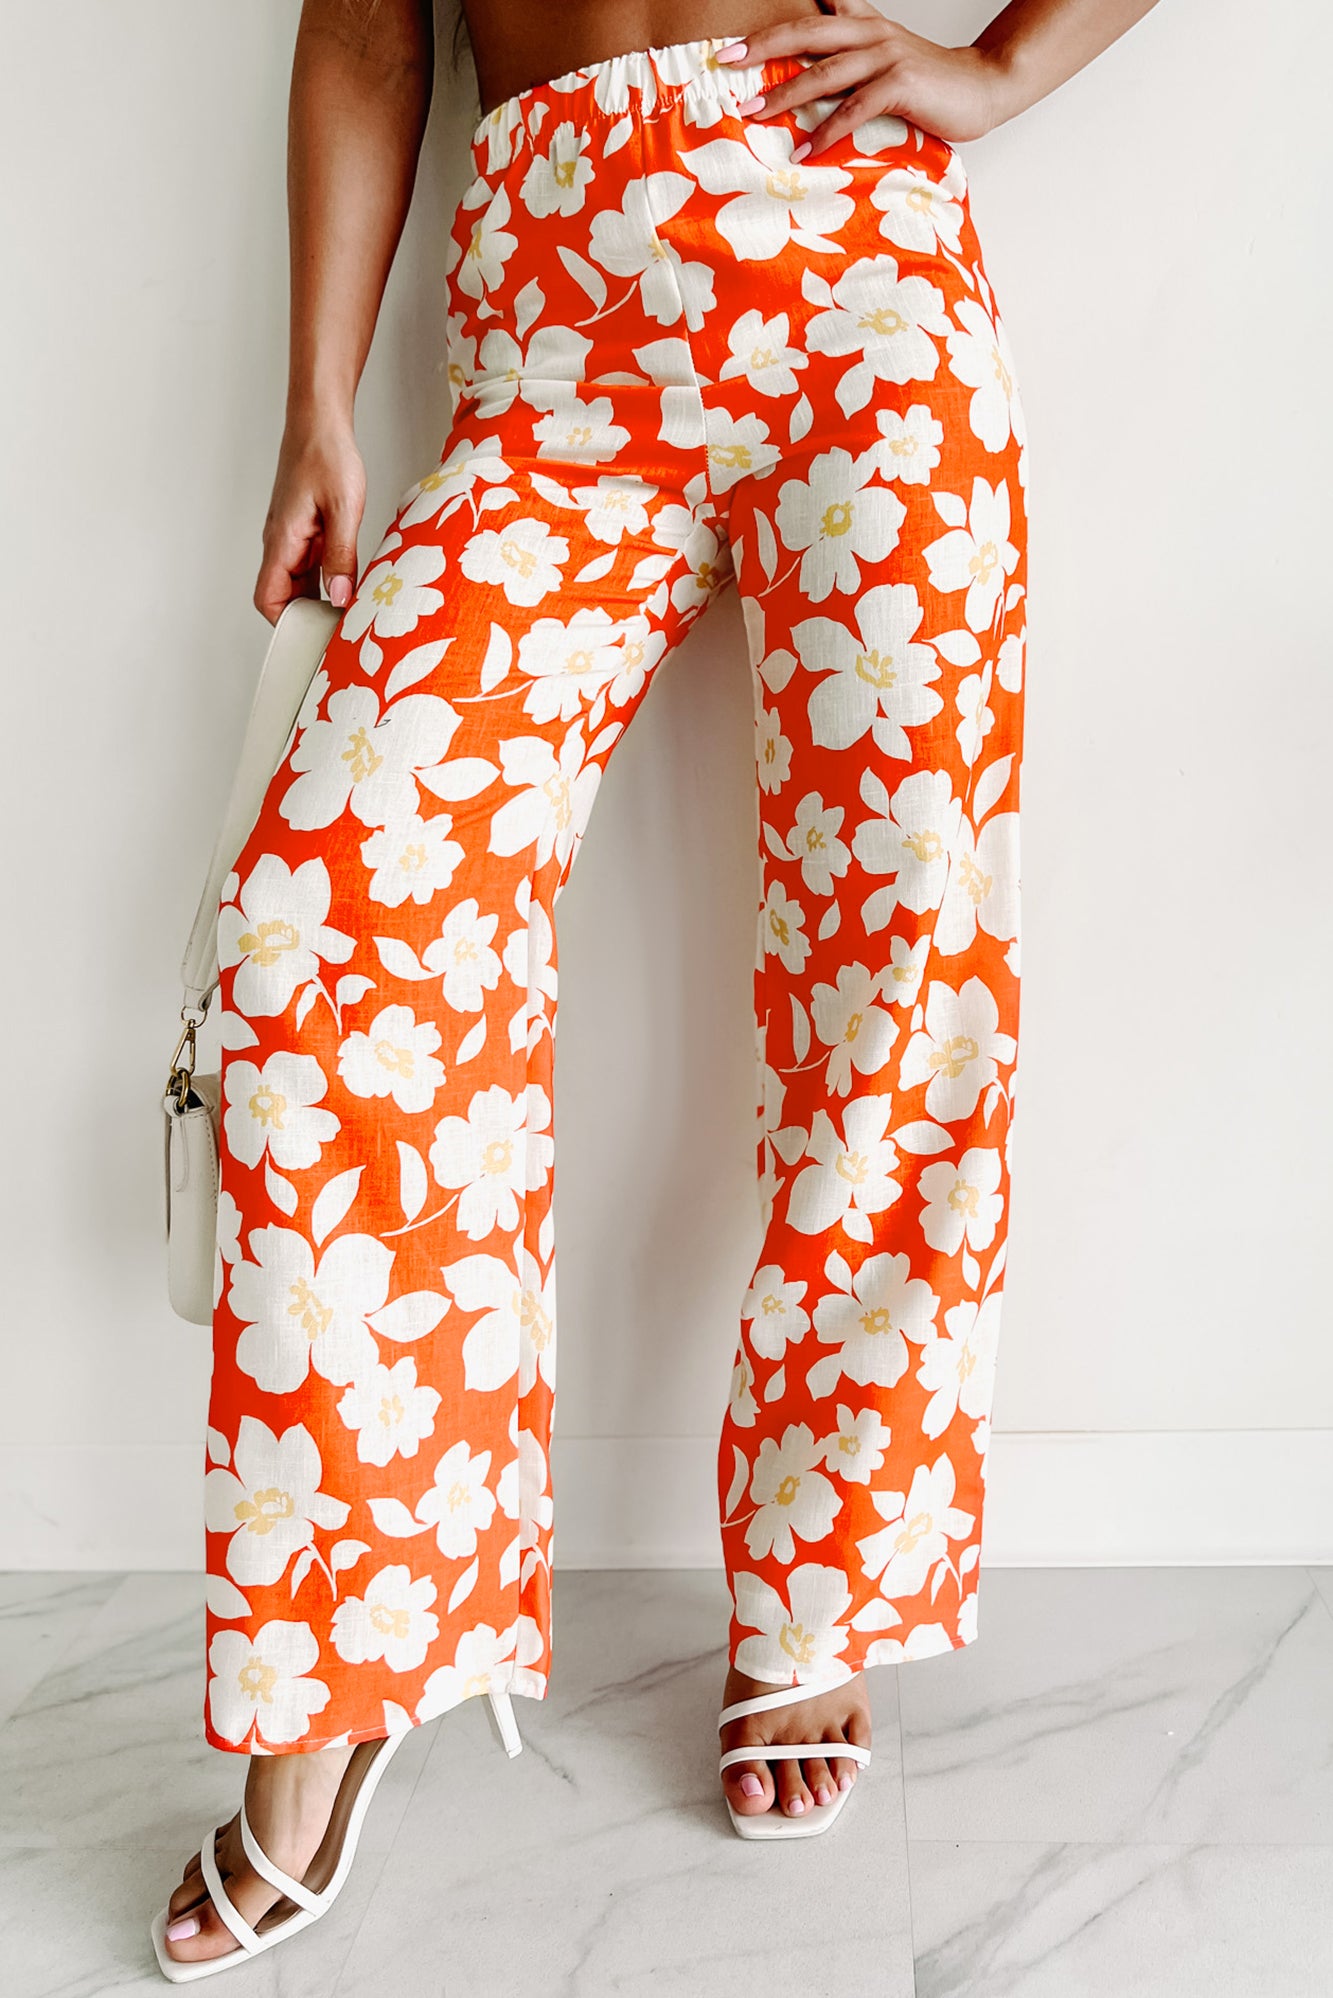 About To Blossom Floral Crop Top & Pant Set (Coral Combo) - NanaMacs